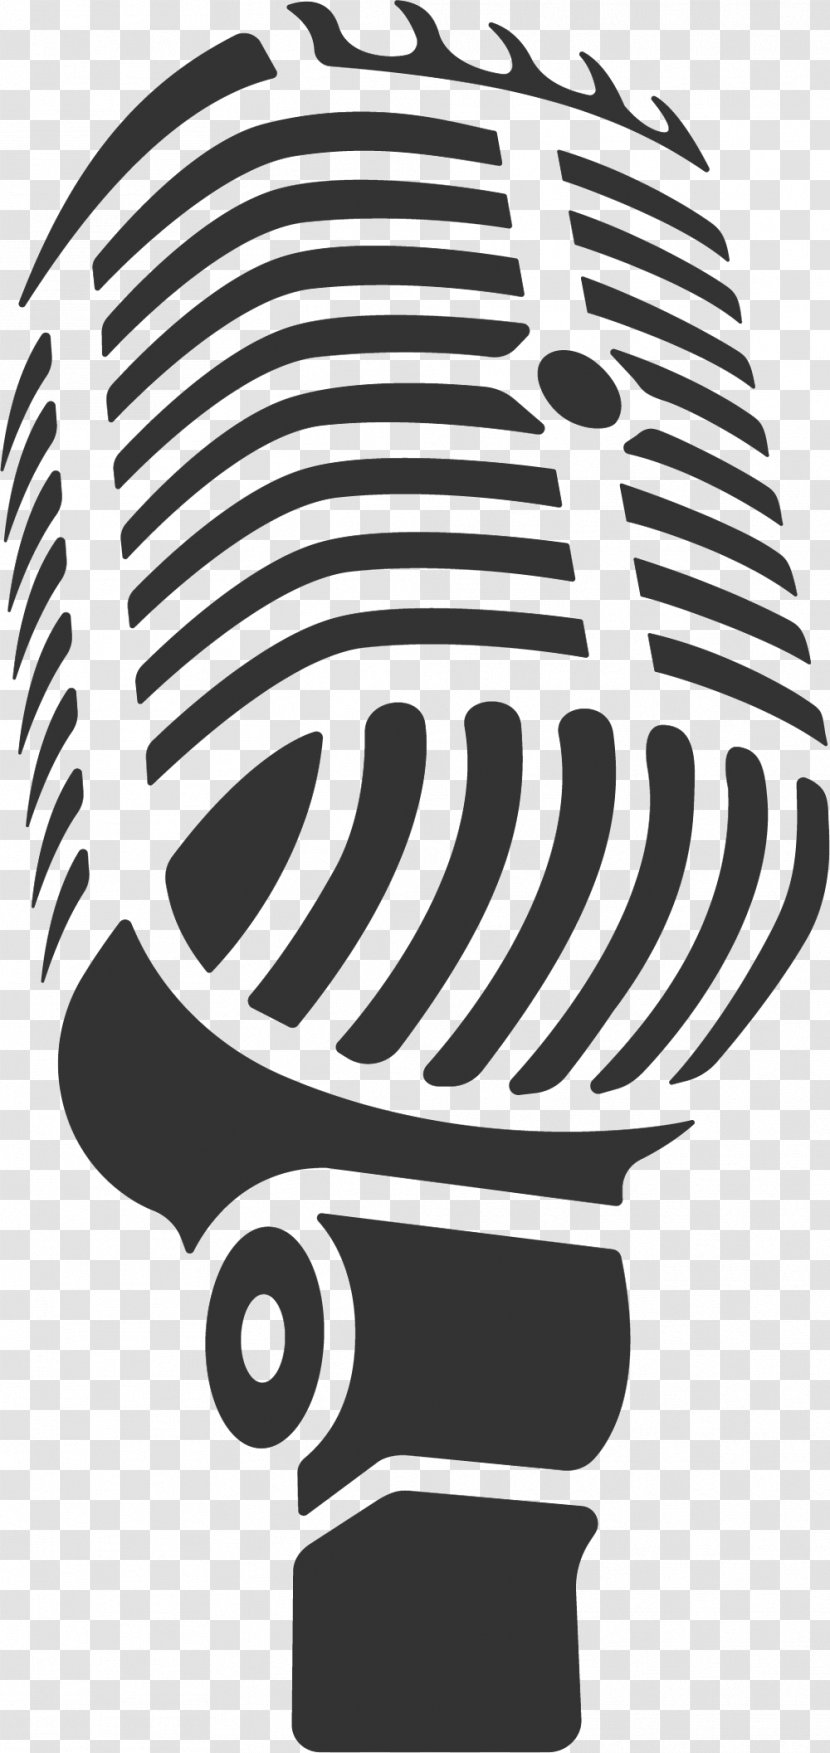 Microphone Recording Studio Sound And Reproduction Clip Art - Cartoon Transparent PNG